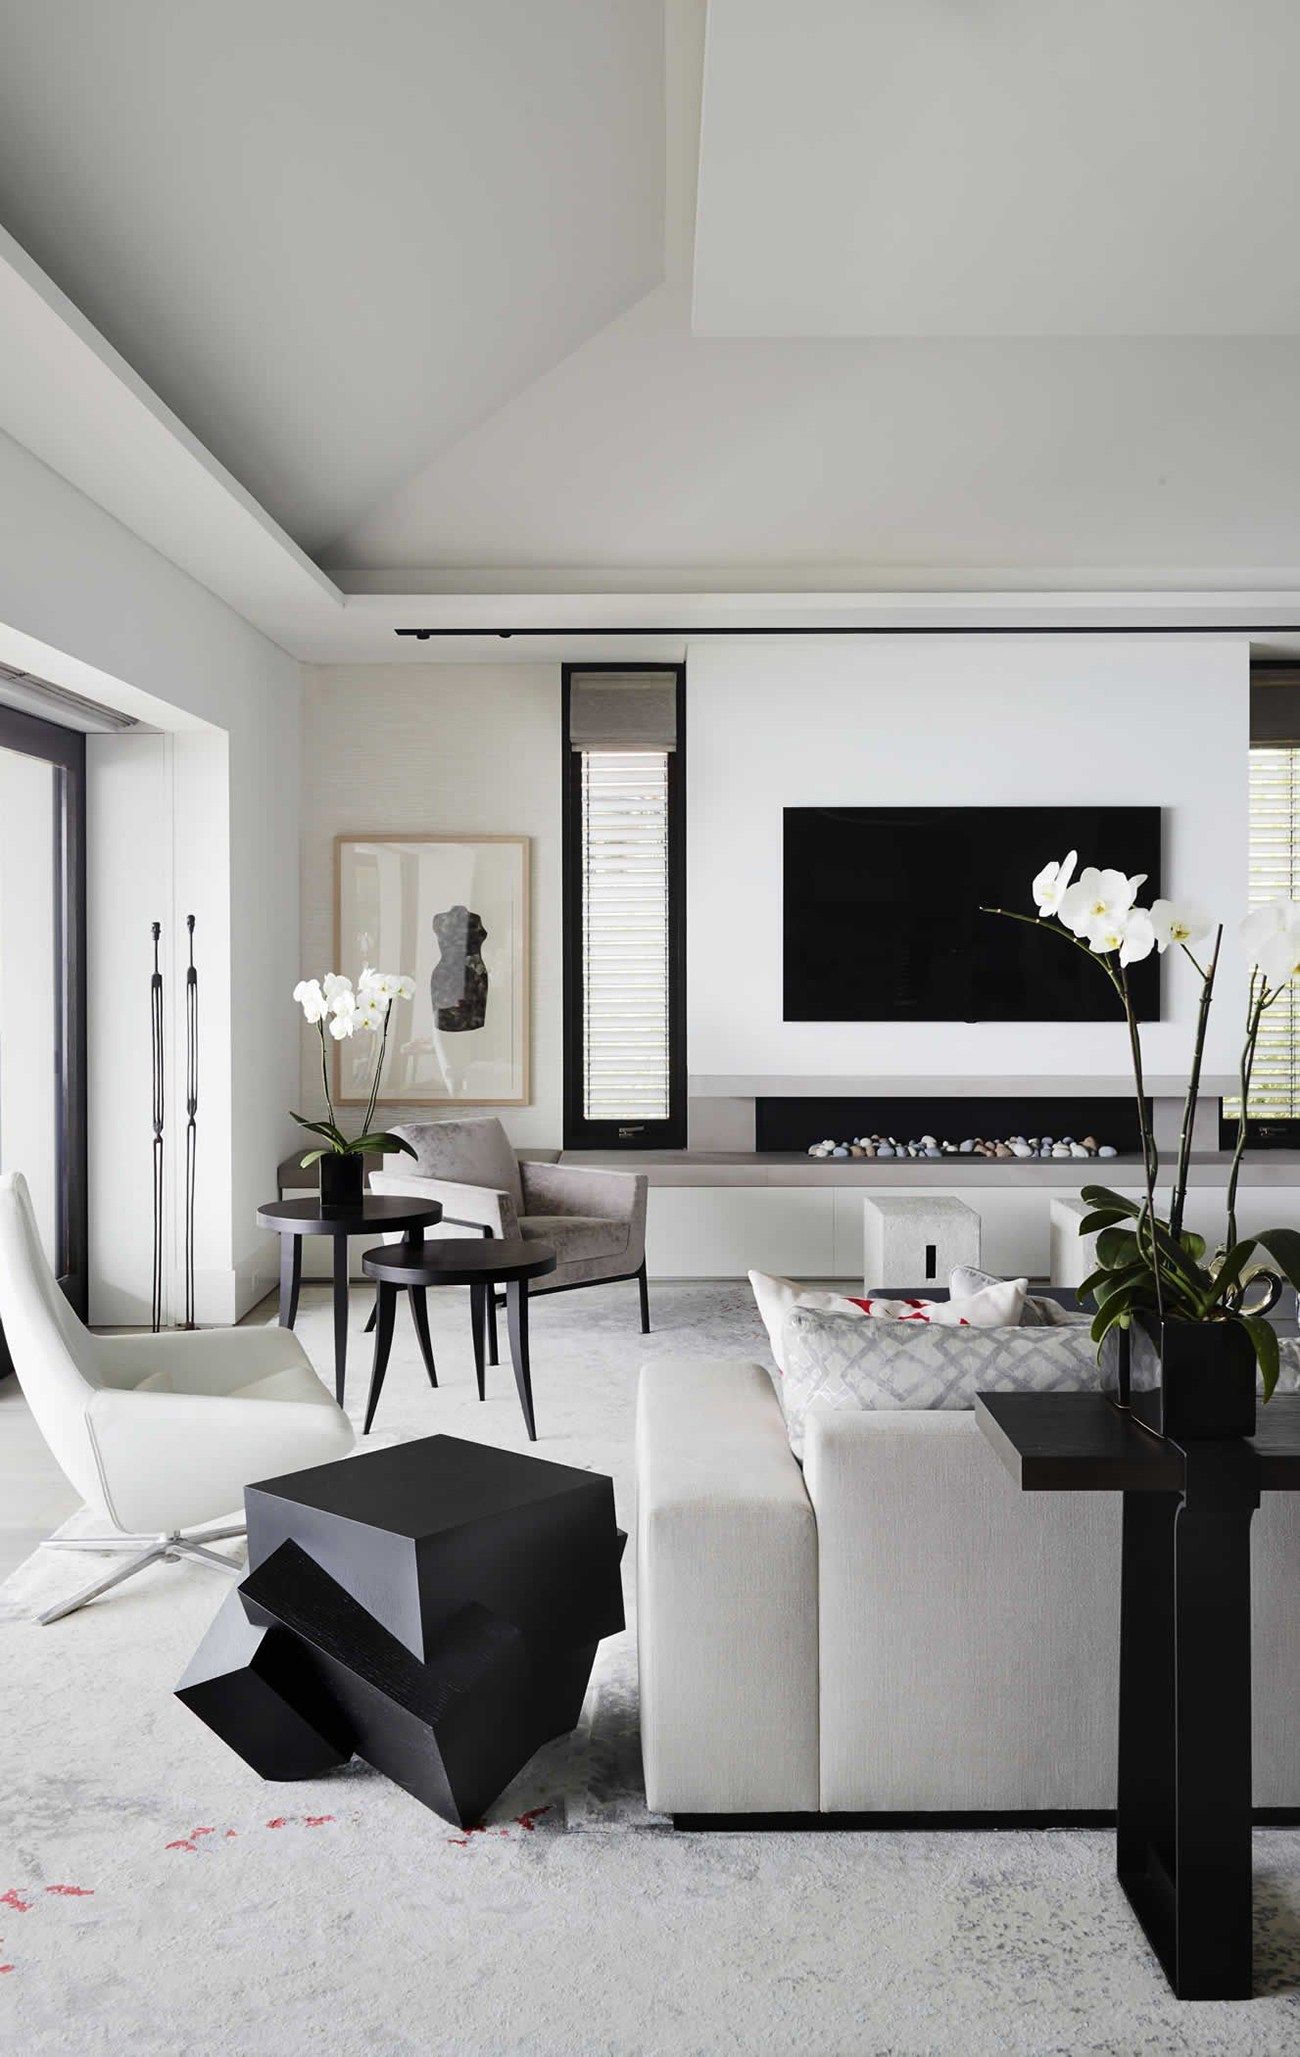 Mix and Match the Contrasting Furniture